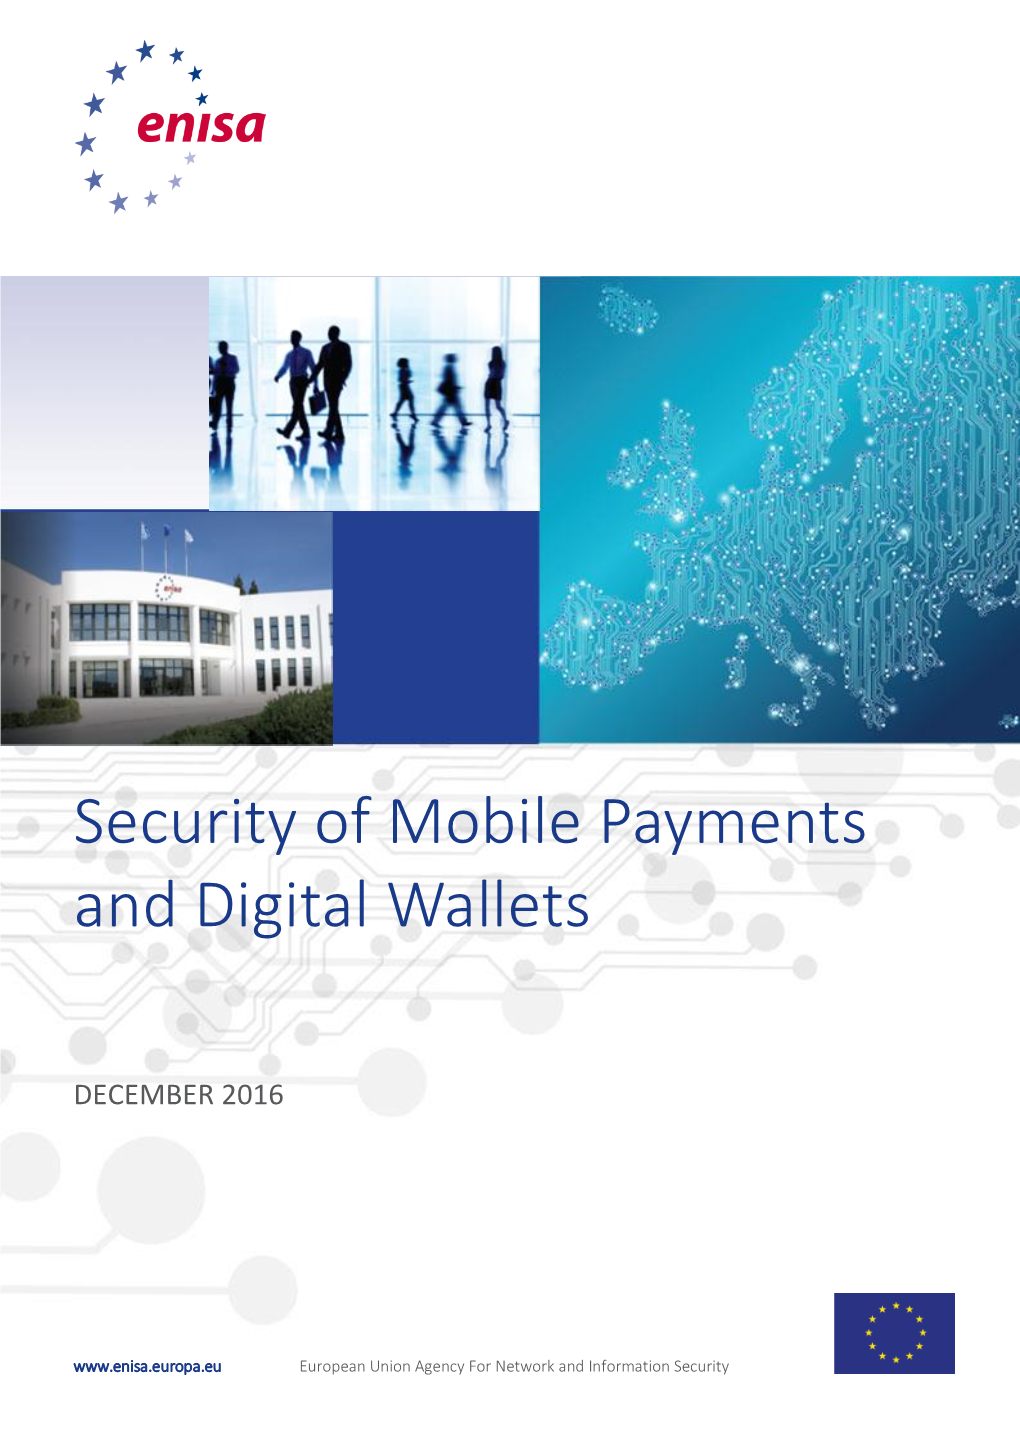 Security of Mobile Payments and Digital Wallets